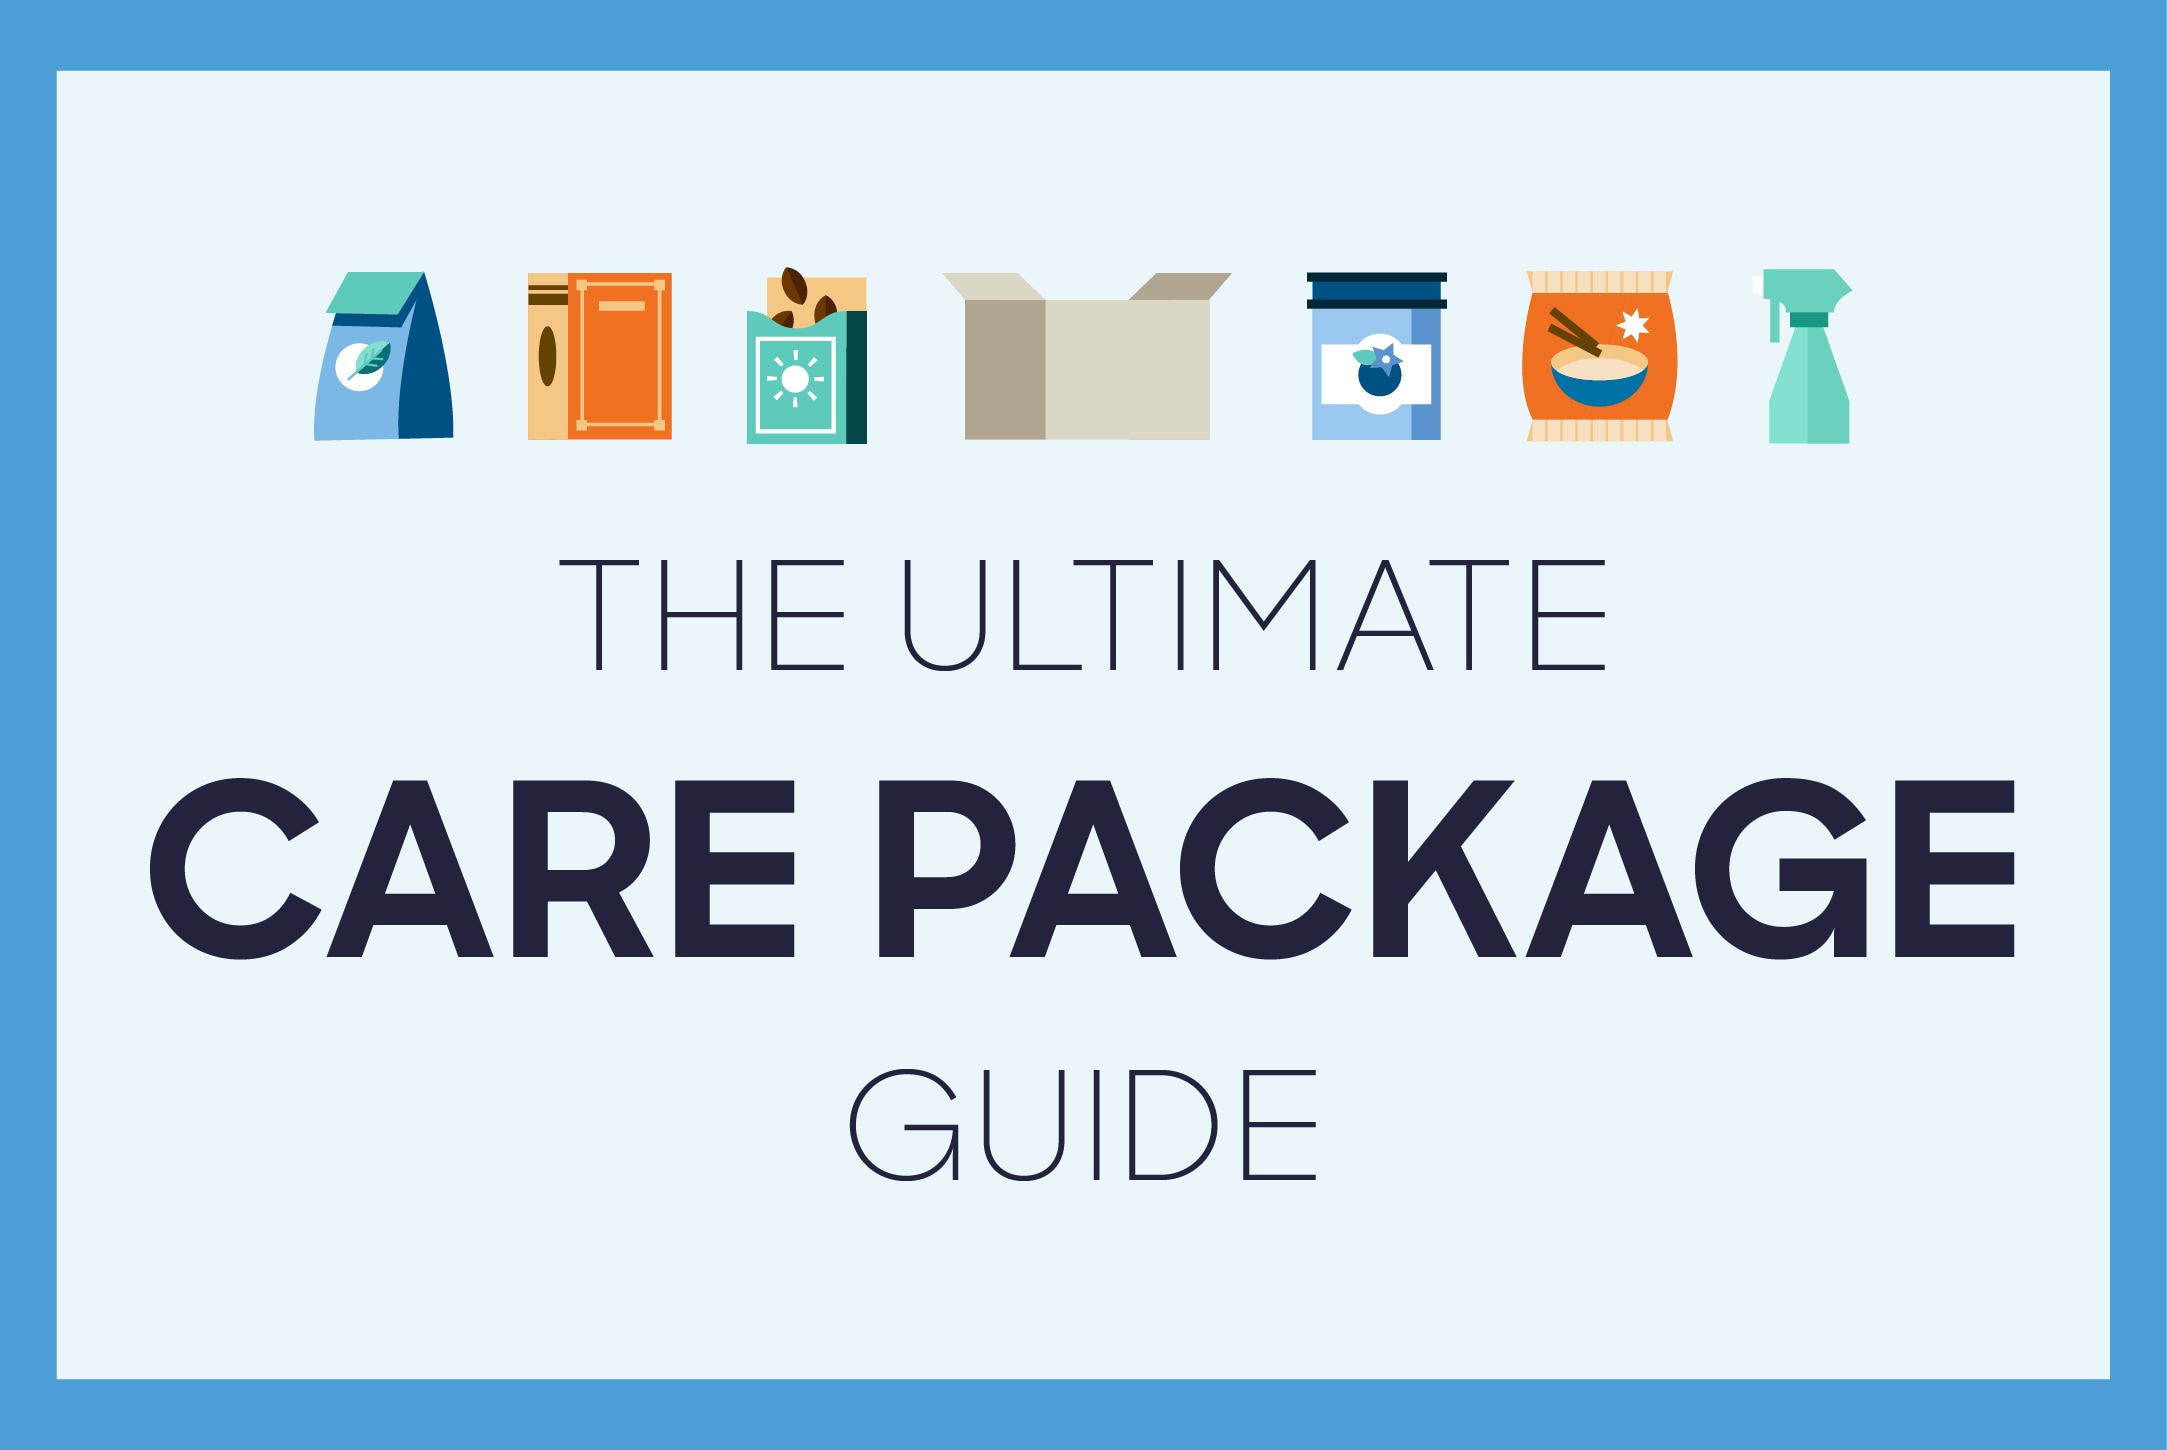 Care package ideas for college students